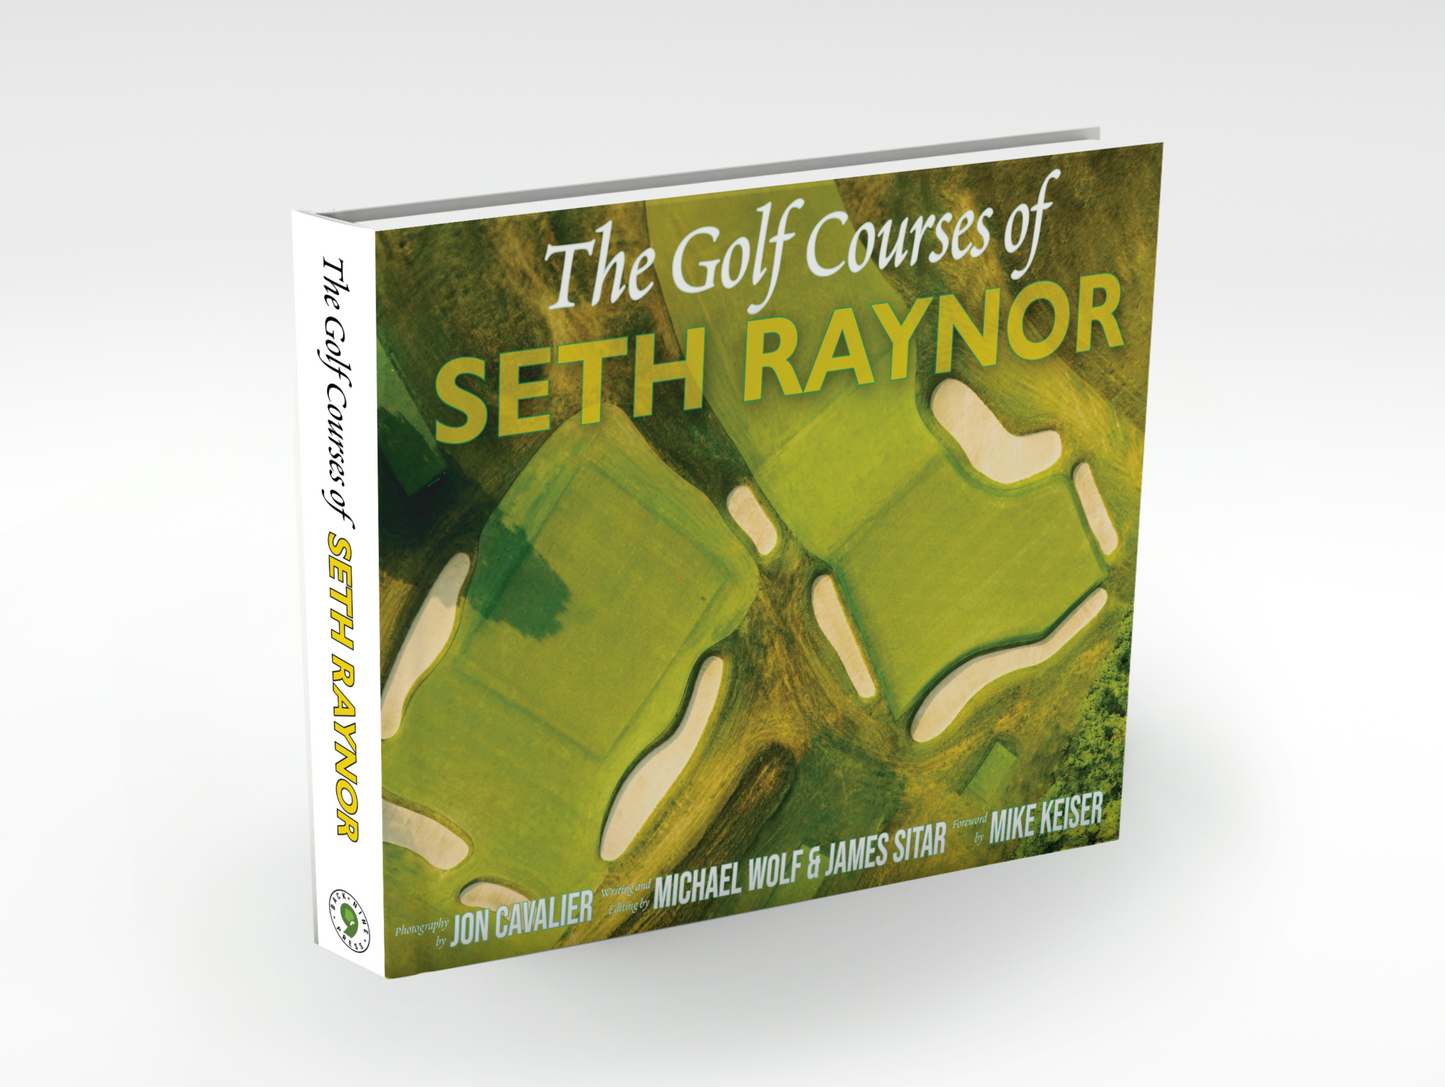 The Golf Courses of Seth Raynor